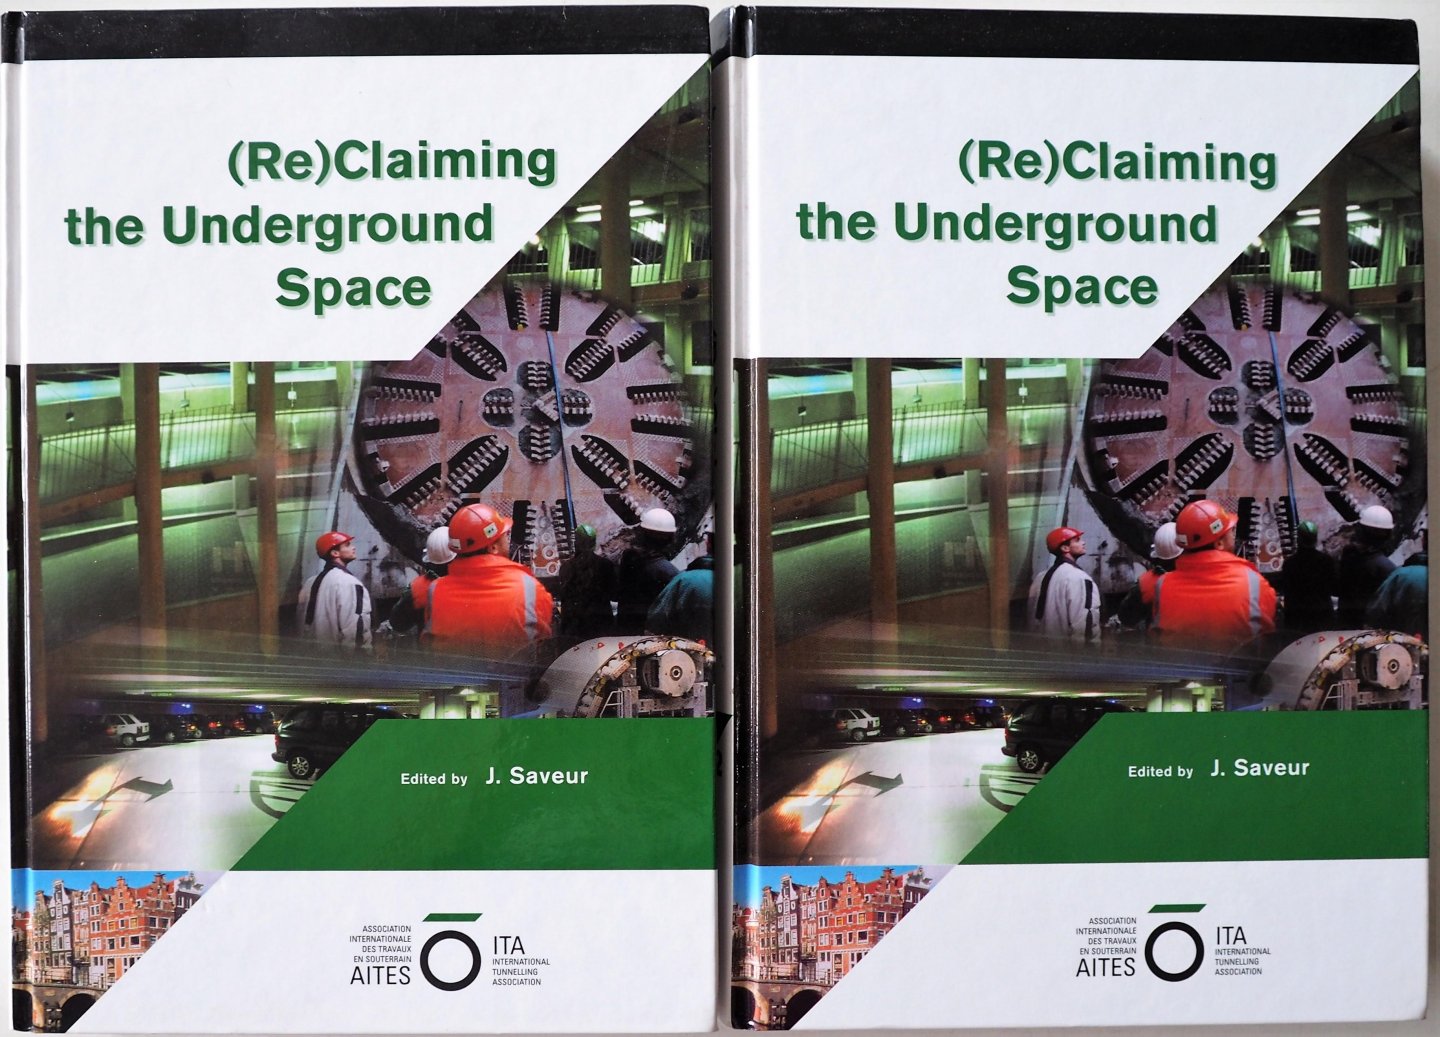 Saveur, J. - (Re)Claiming the Underground Space 2 lots Proceedings of the ITA World Tunnelling Congress 2003 12-17 April Amsterdam Vol. 1 587pp,  Vol. 2 579pp